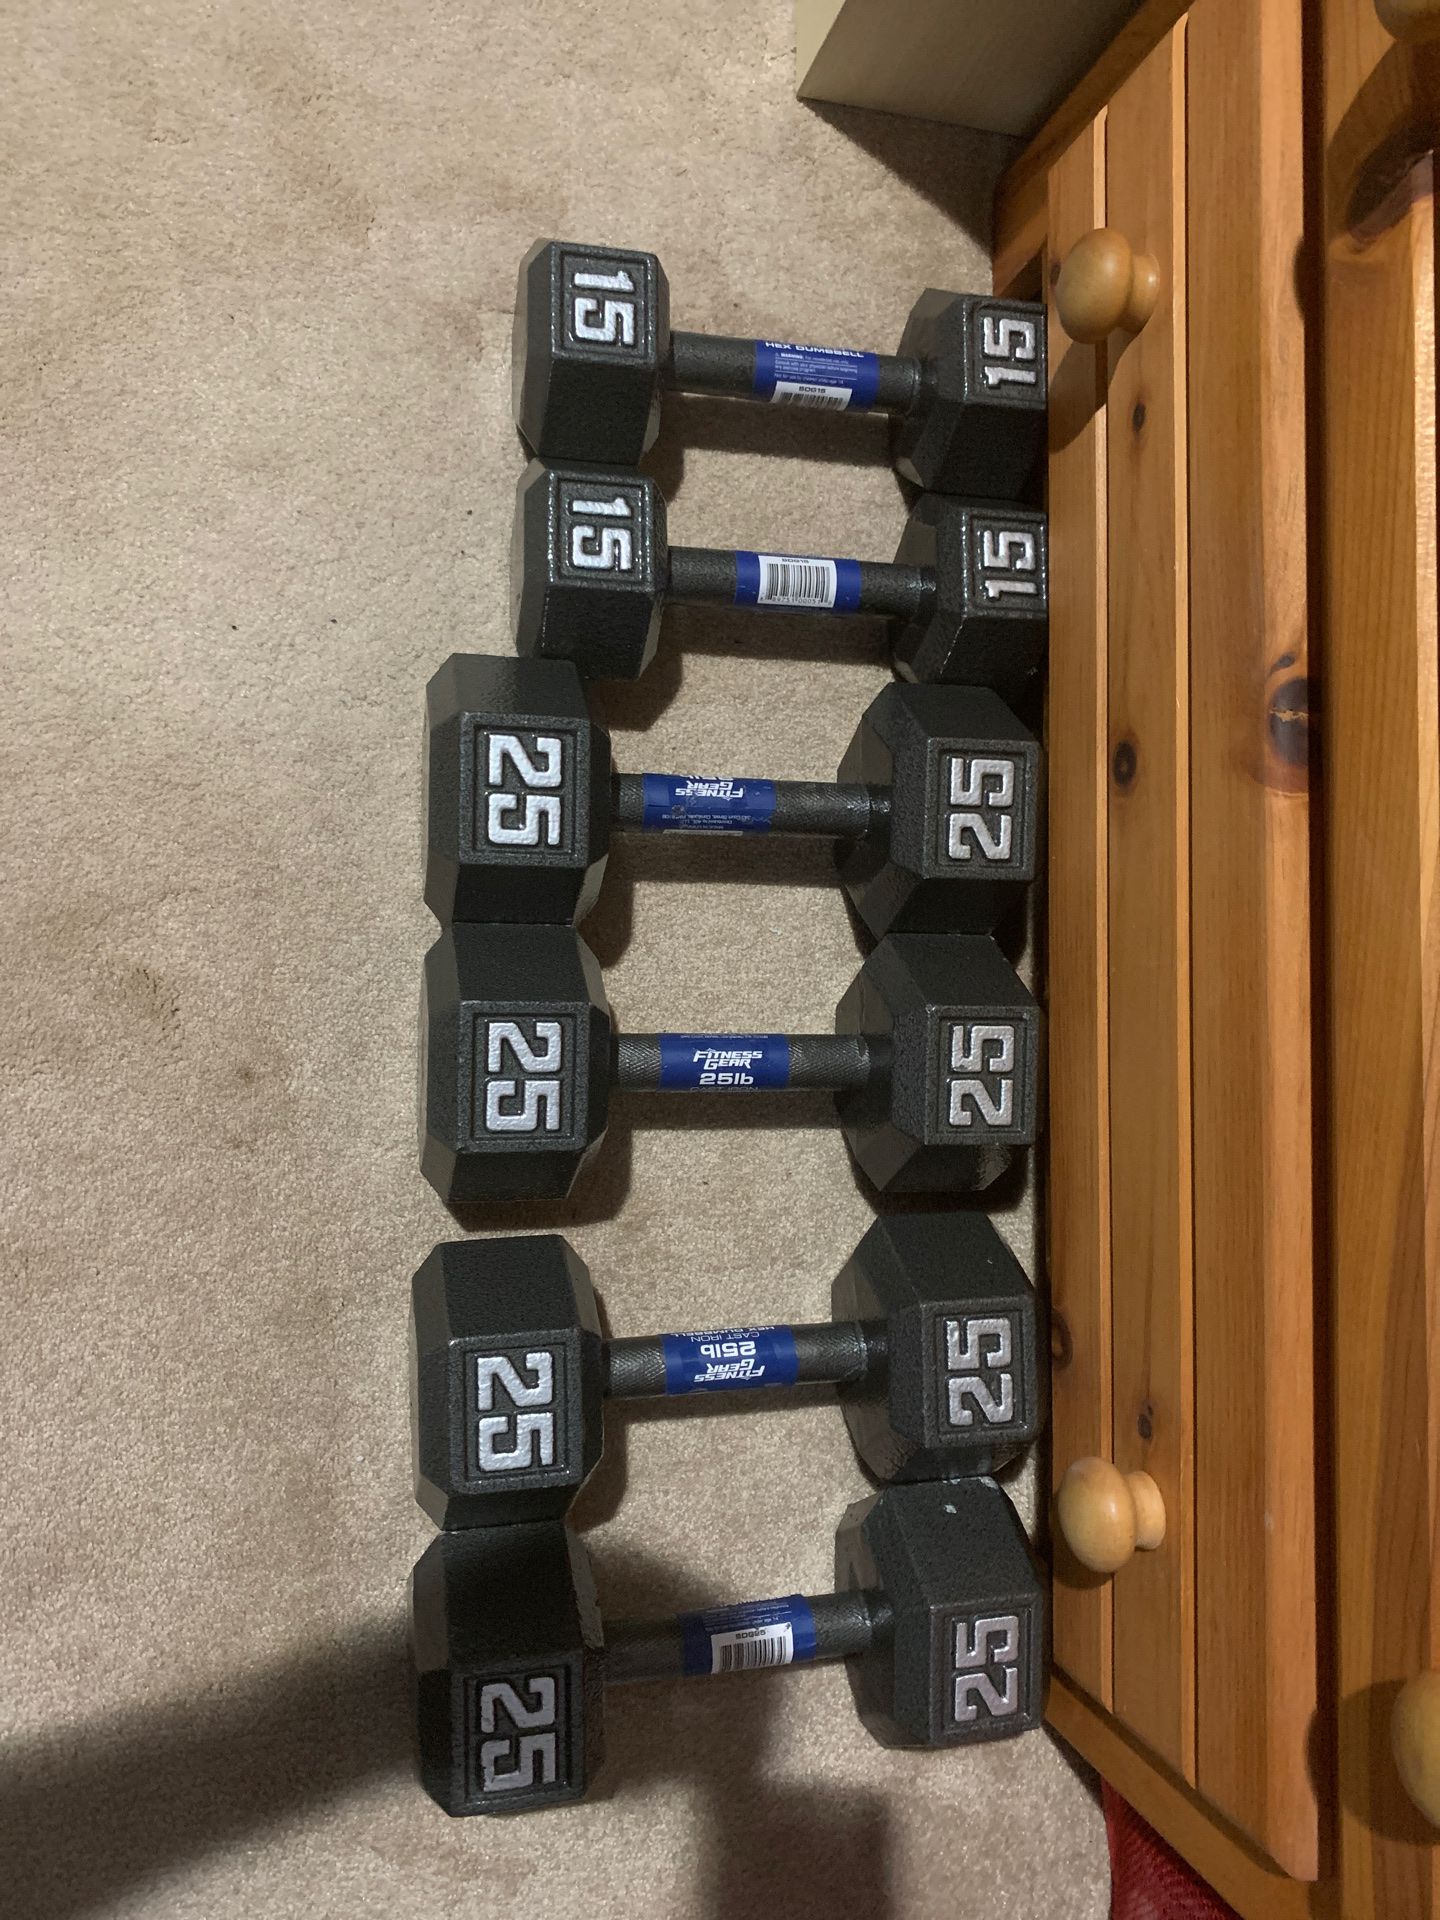 Fitness gear weights